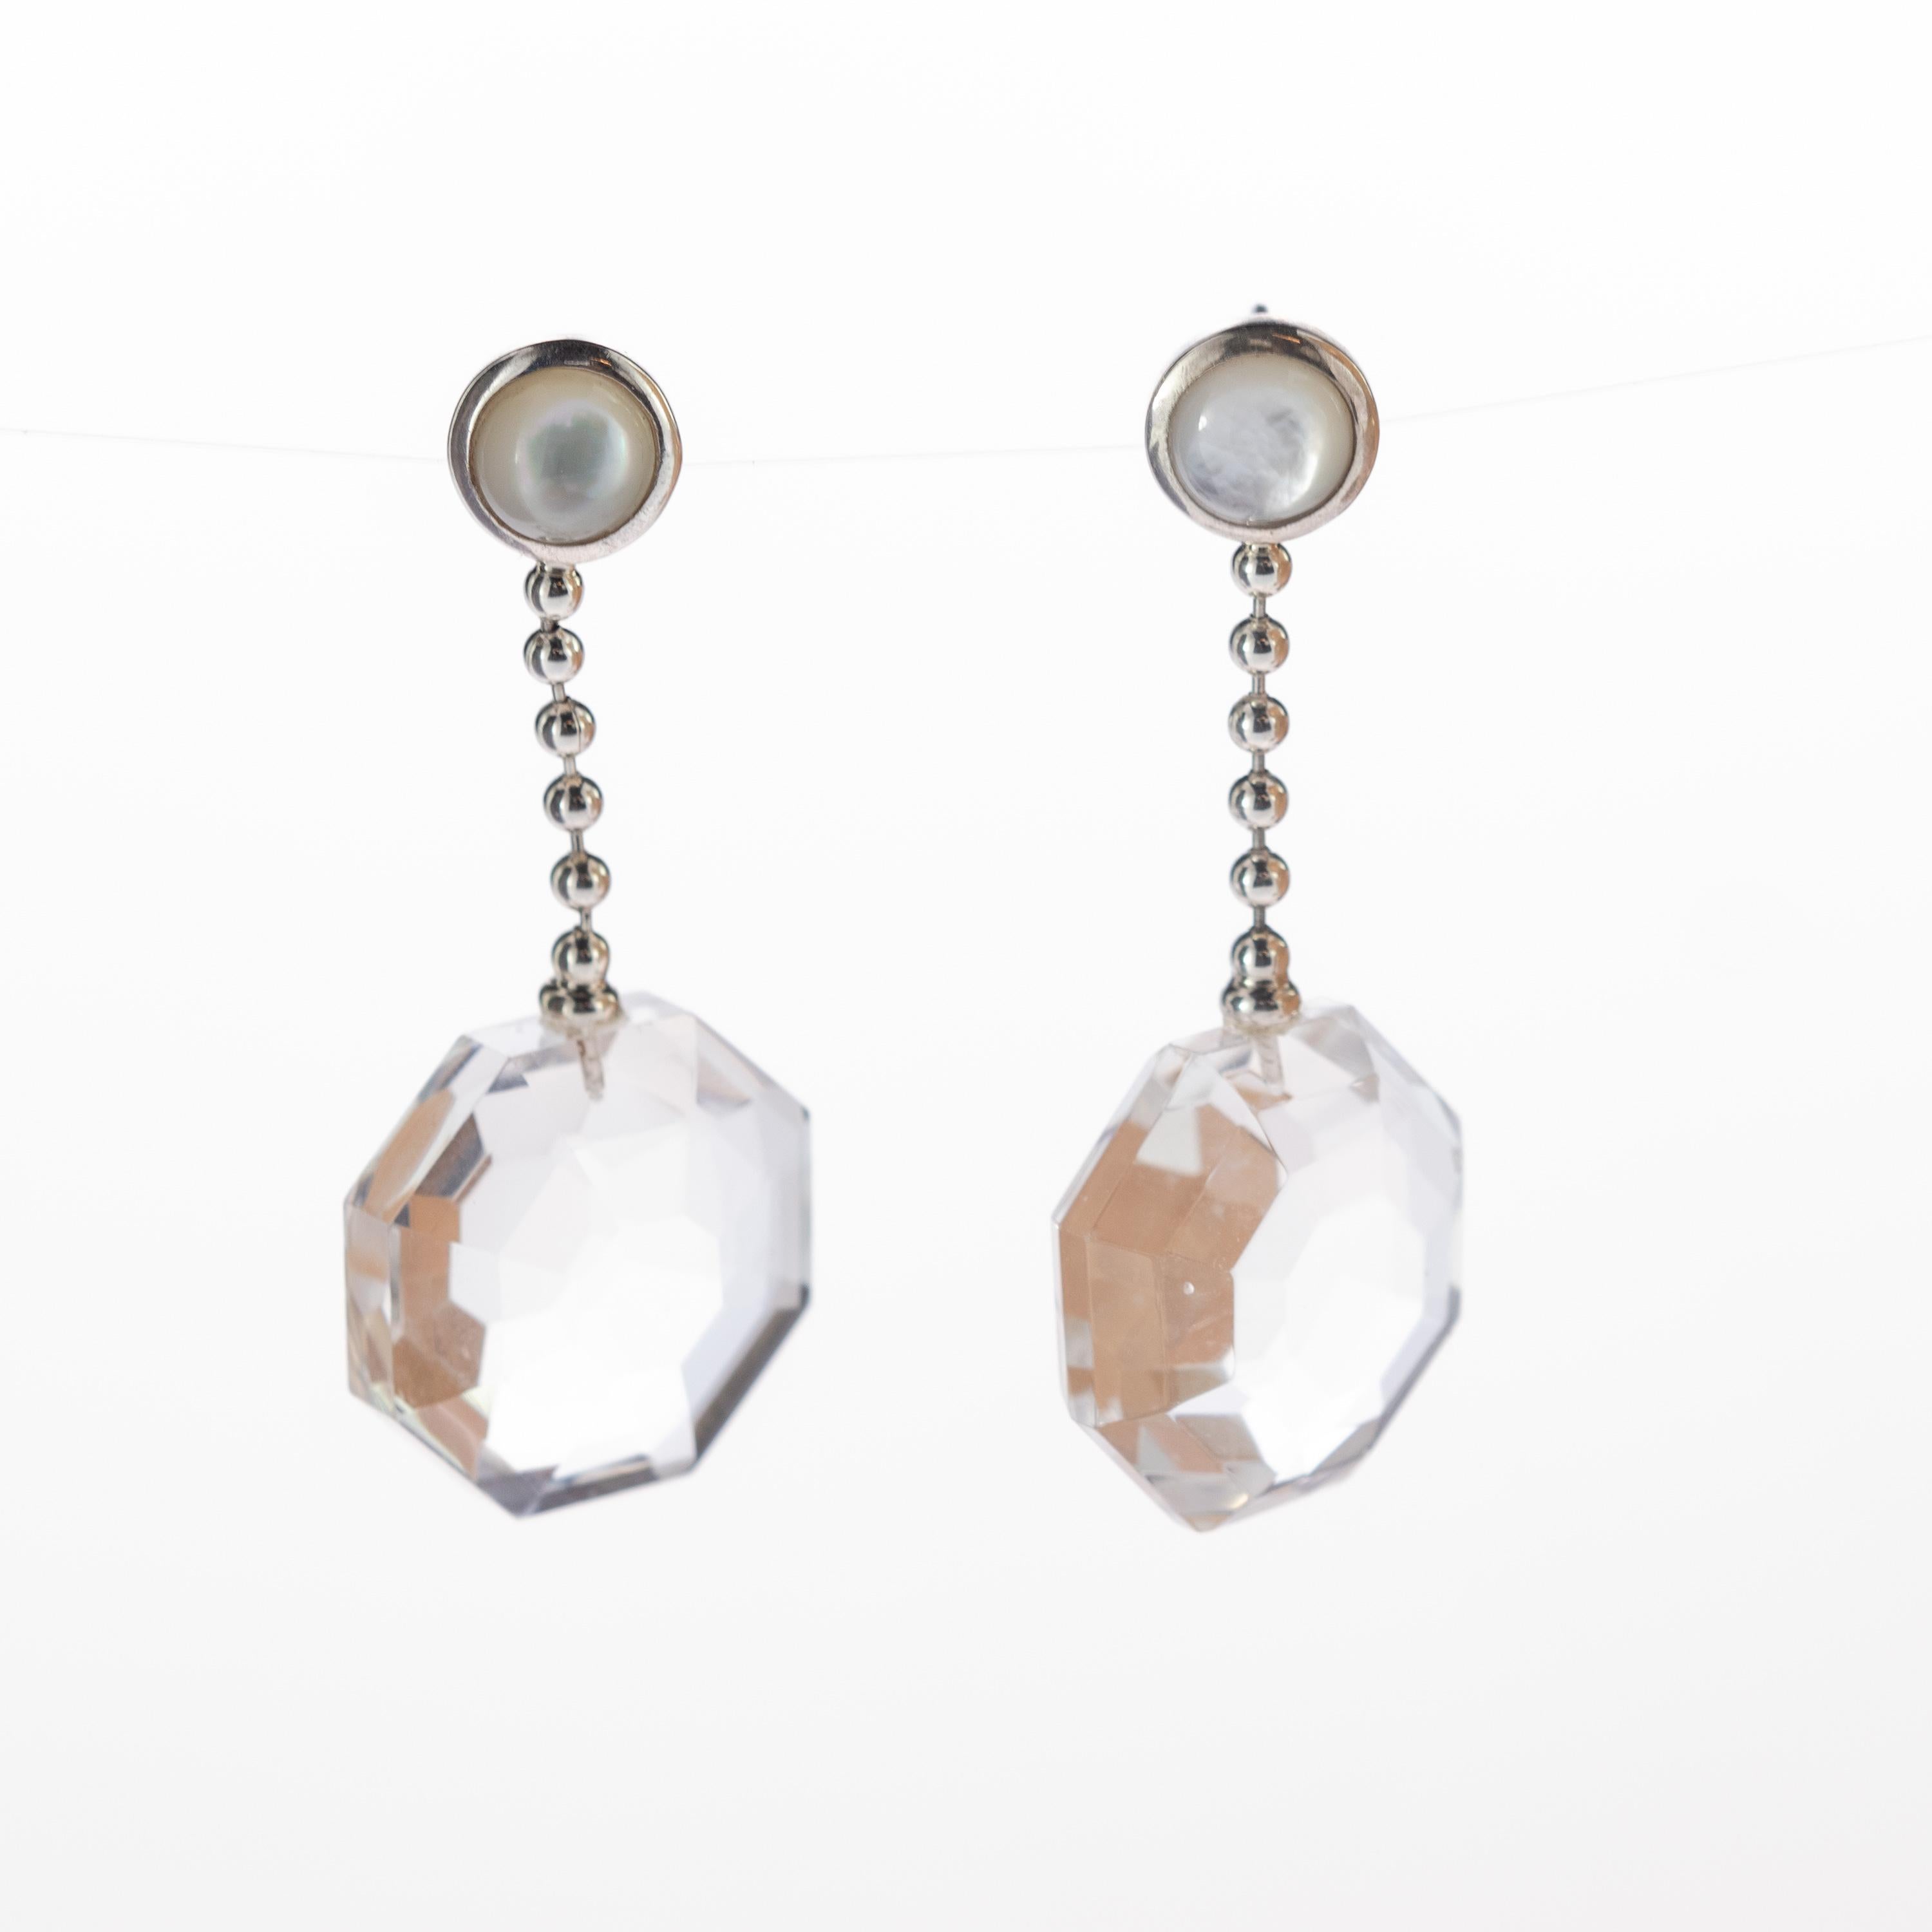 Unique and modern piece designed with a classy and elegant style. Dangle drop pearl earrings with a delicate 925 sterling silver delicate chain with 6 round details. A fancy jewellery piece ending in a crafted faceted rock crystal dream catcher